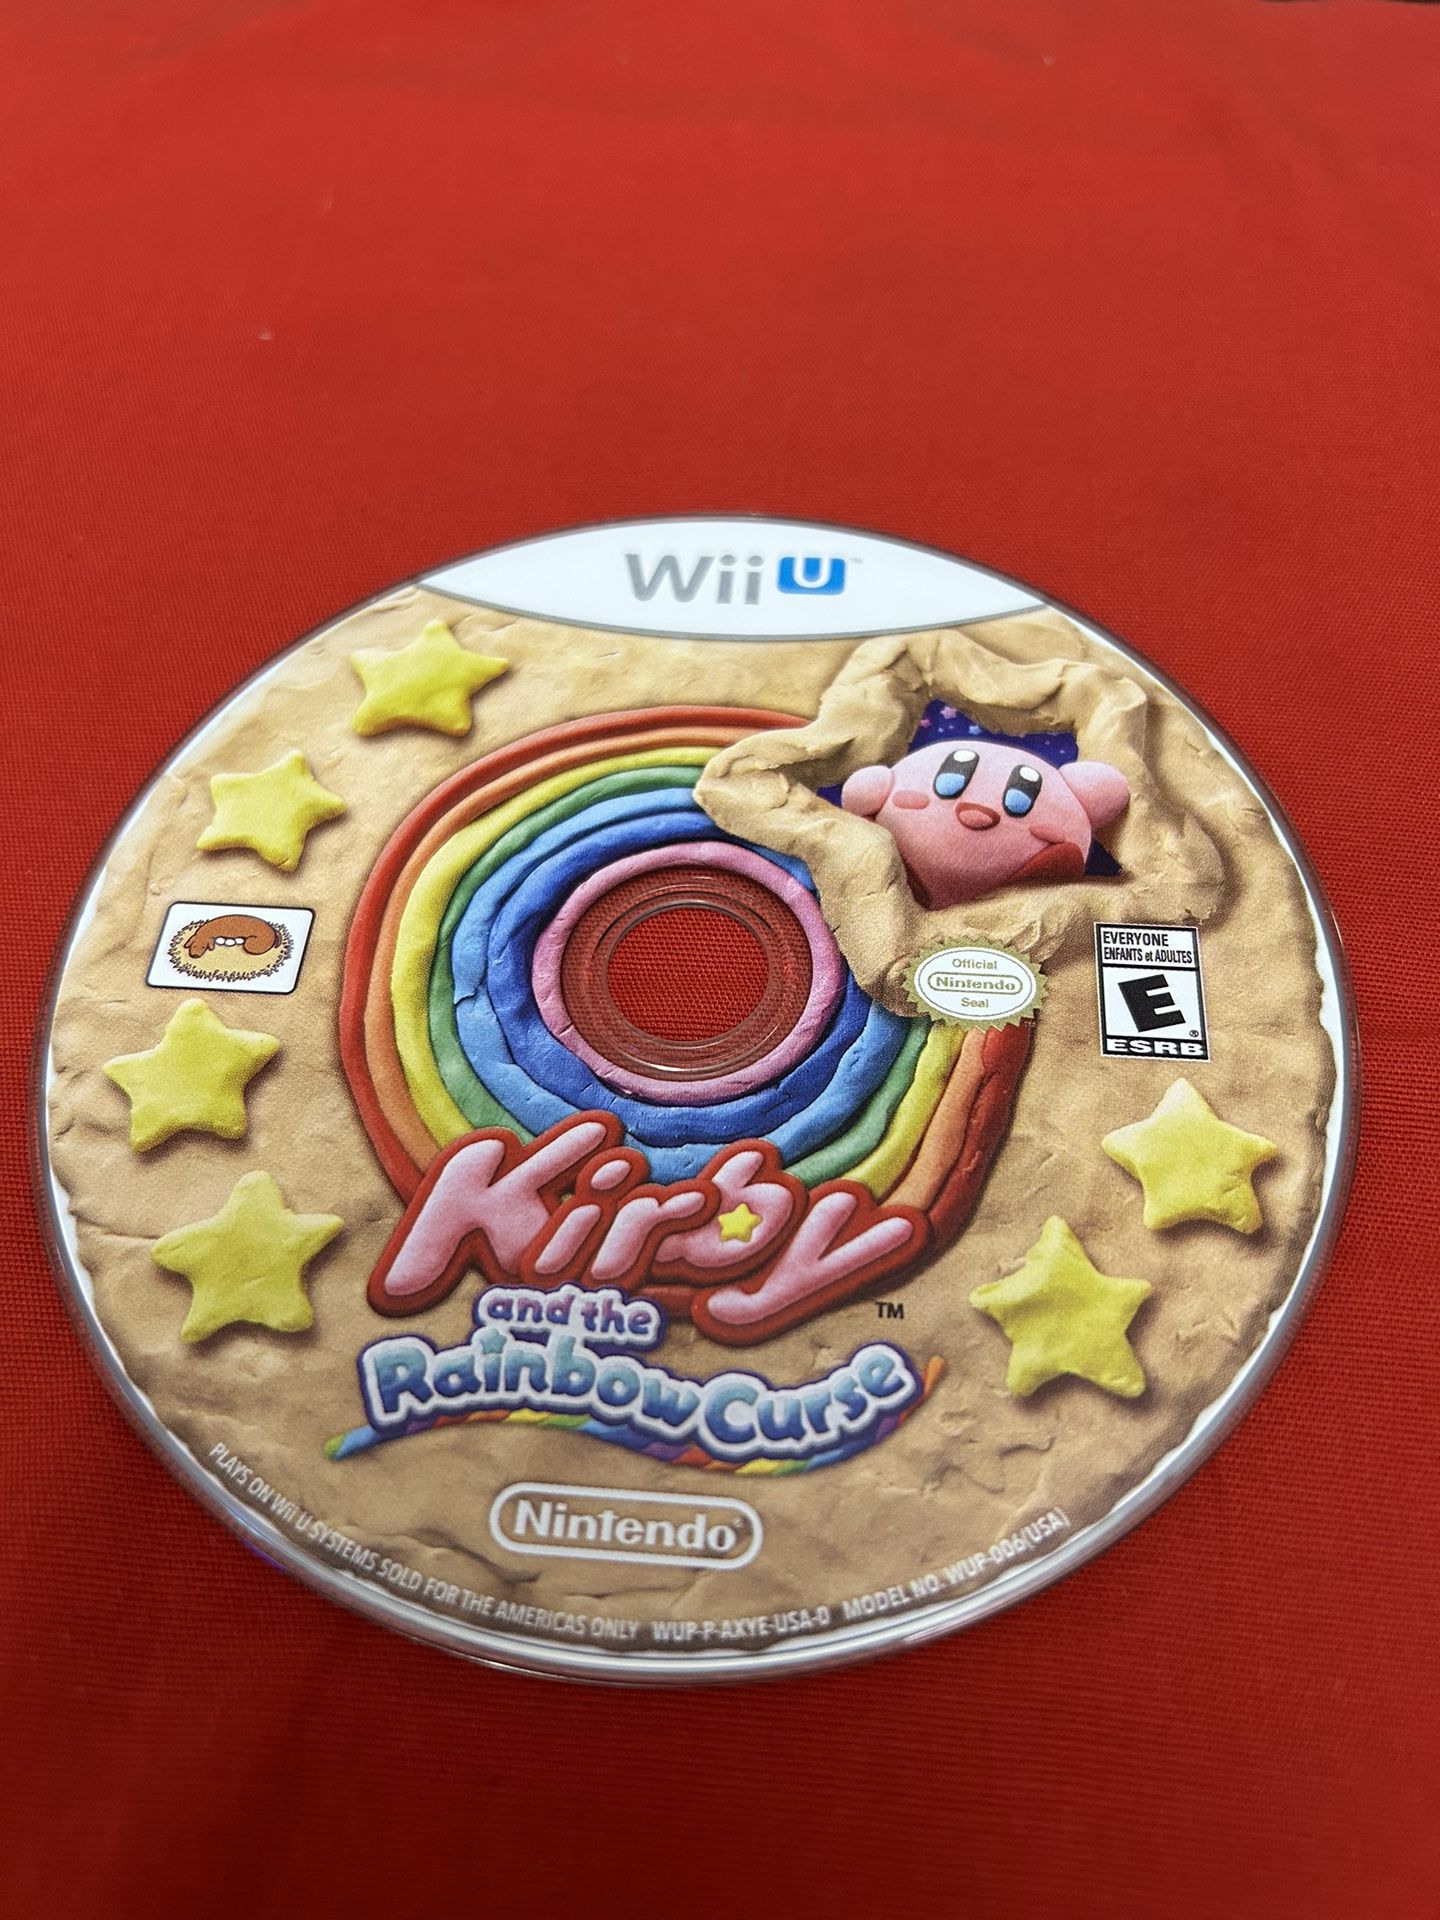 Selling Kirby and the RainbowCurse game for Nintendo Wii U